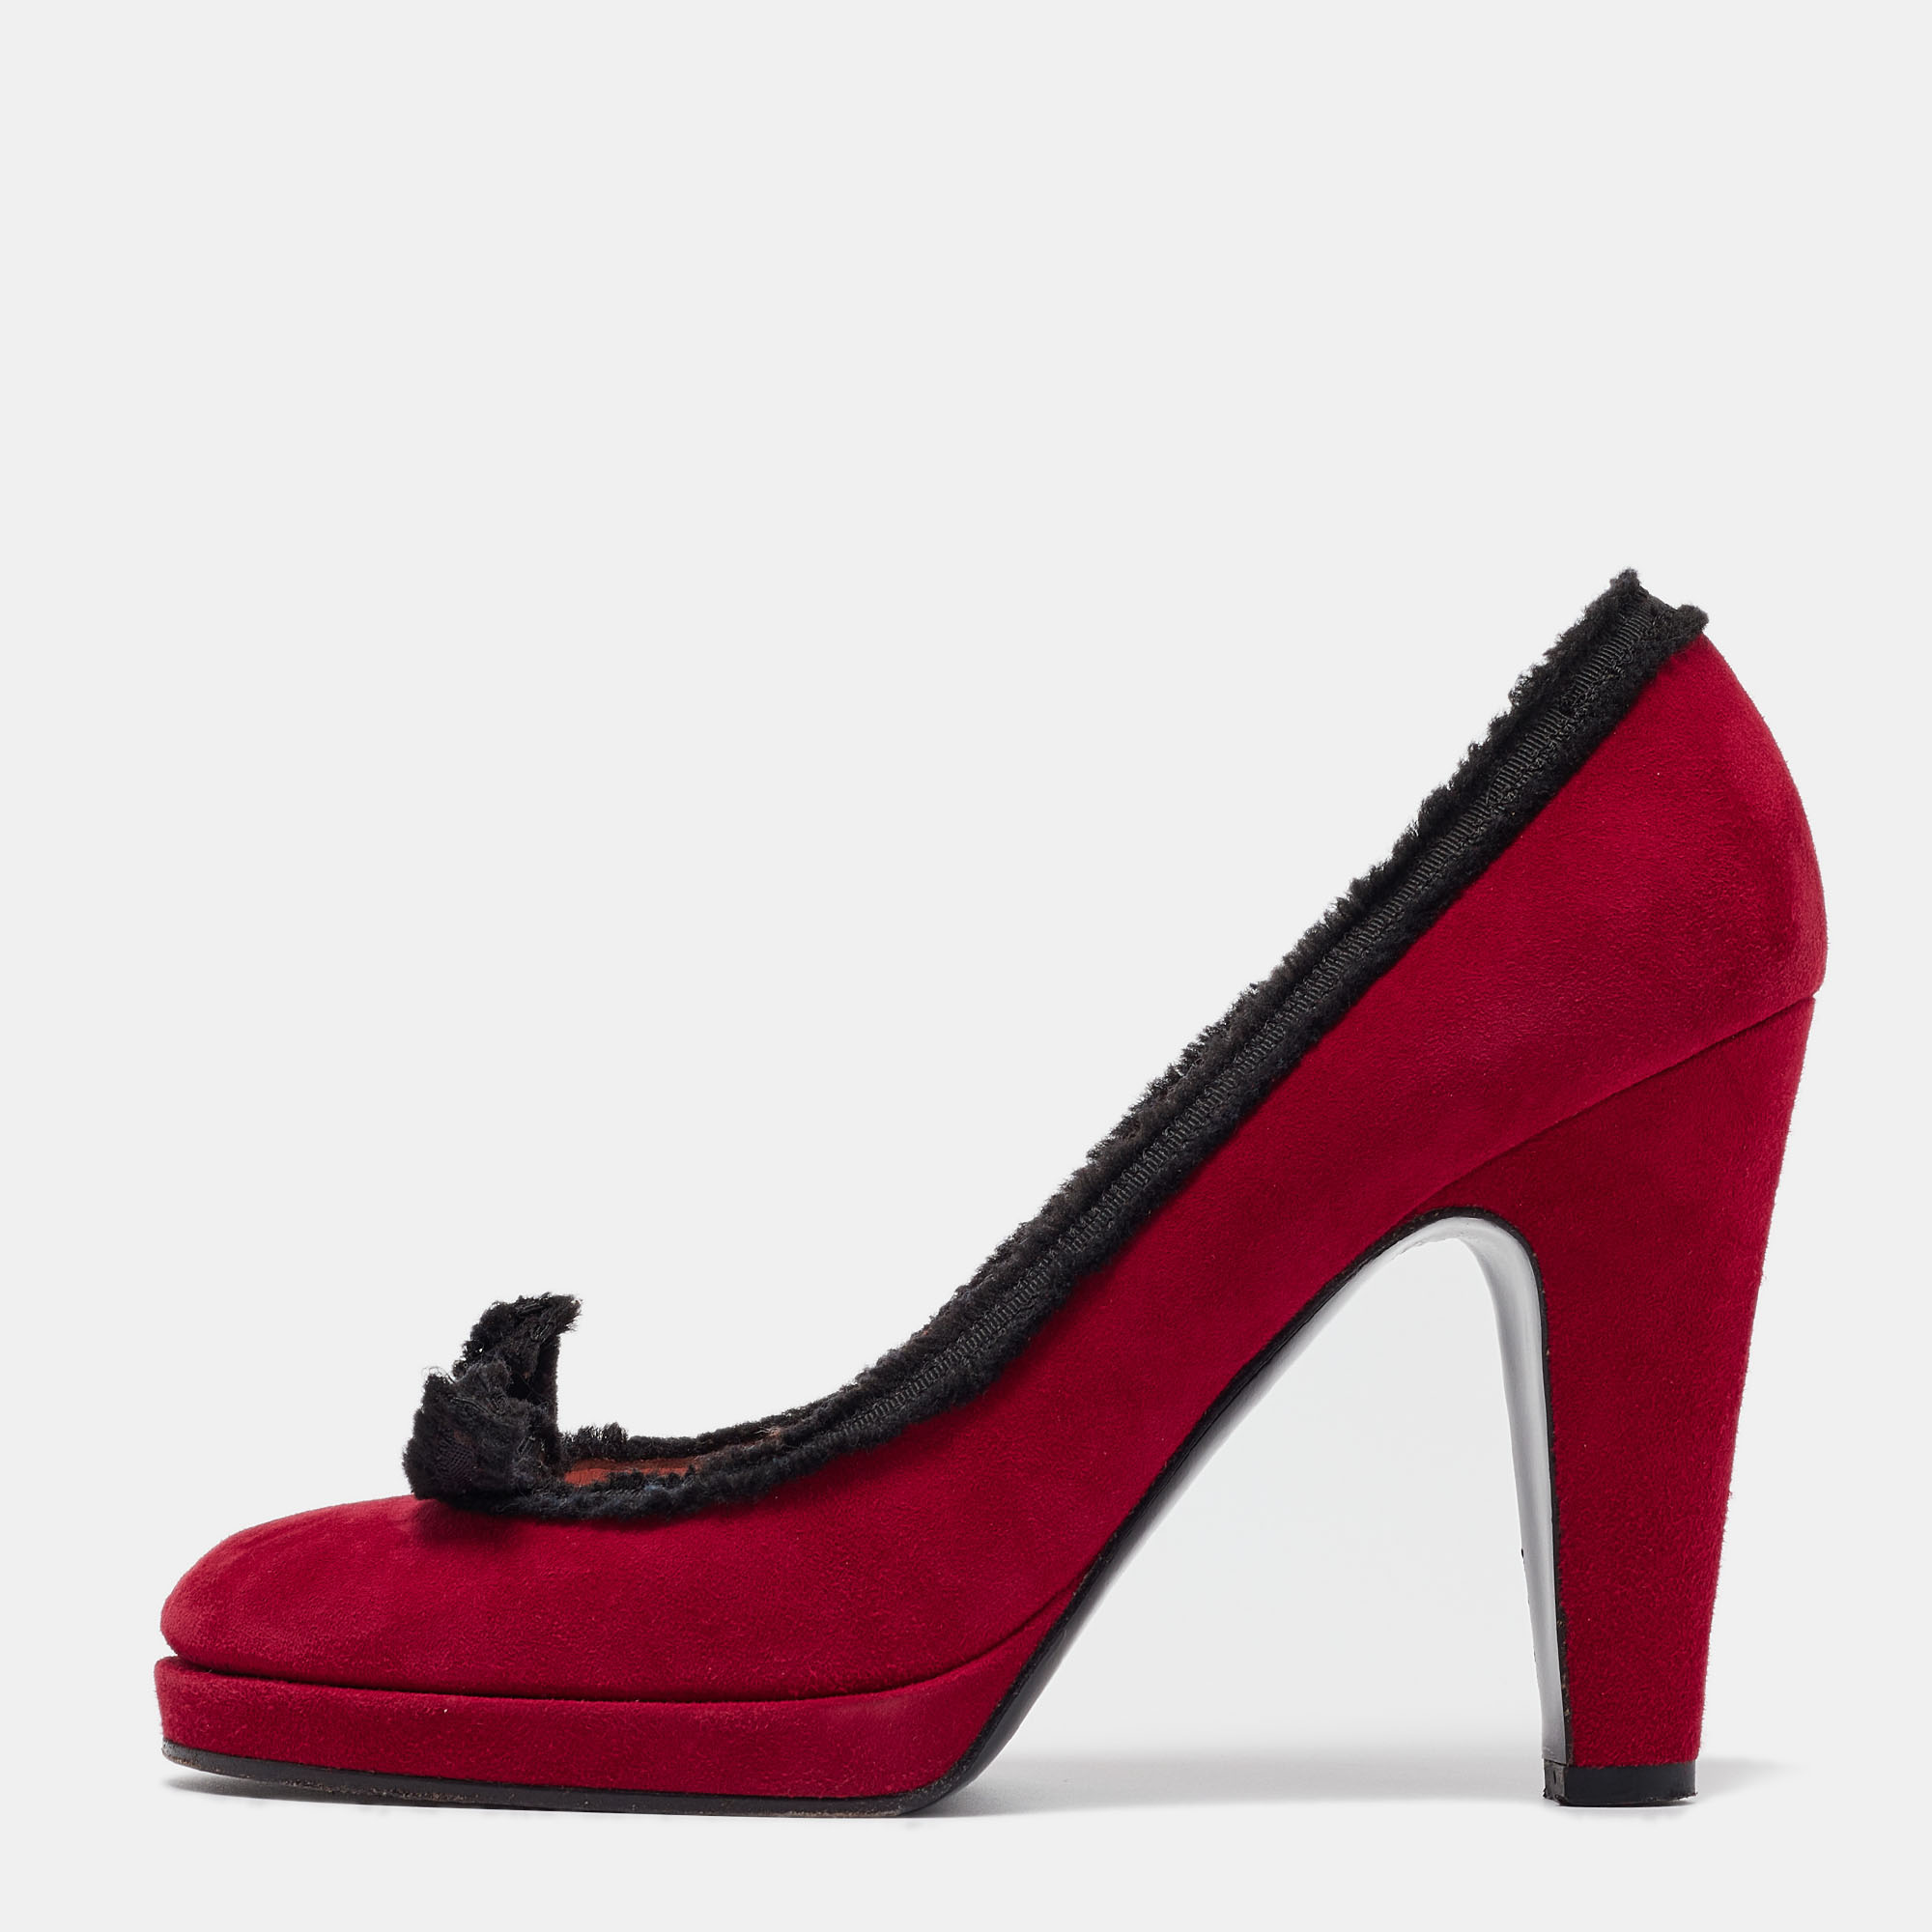 Marc by marc jacobs red suede bow block pumps size 38